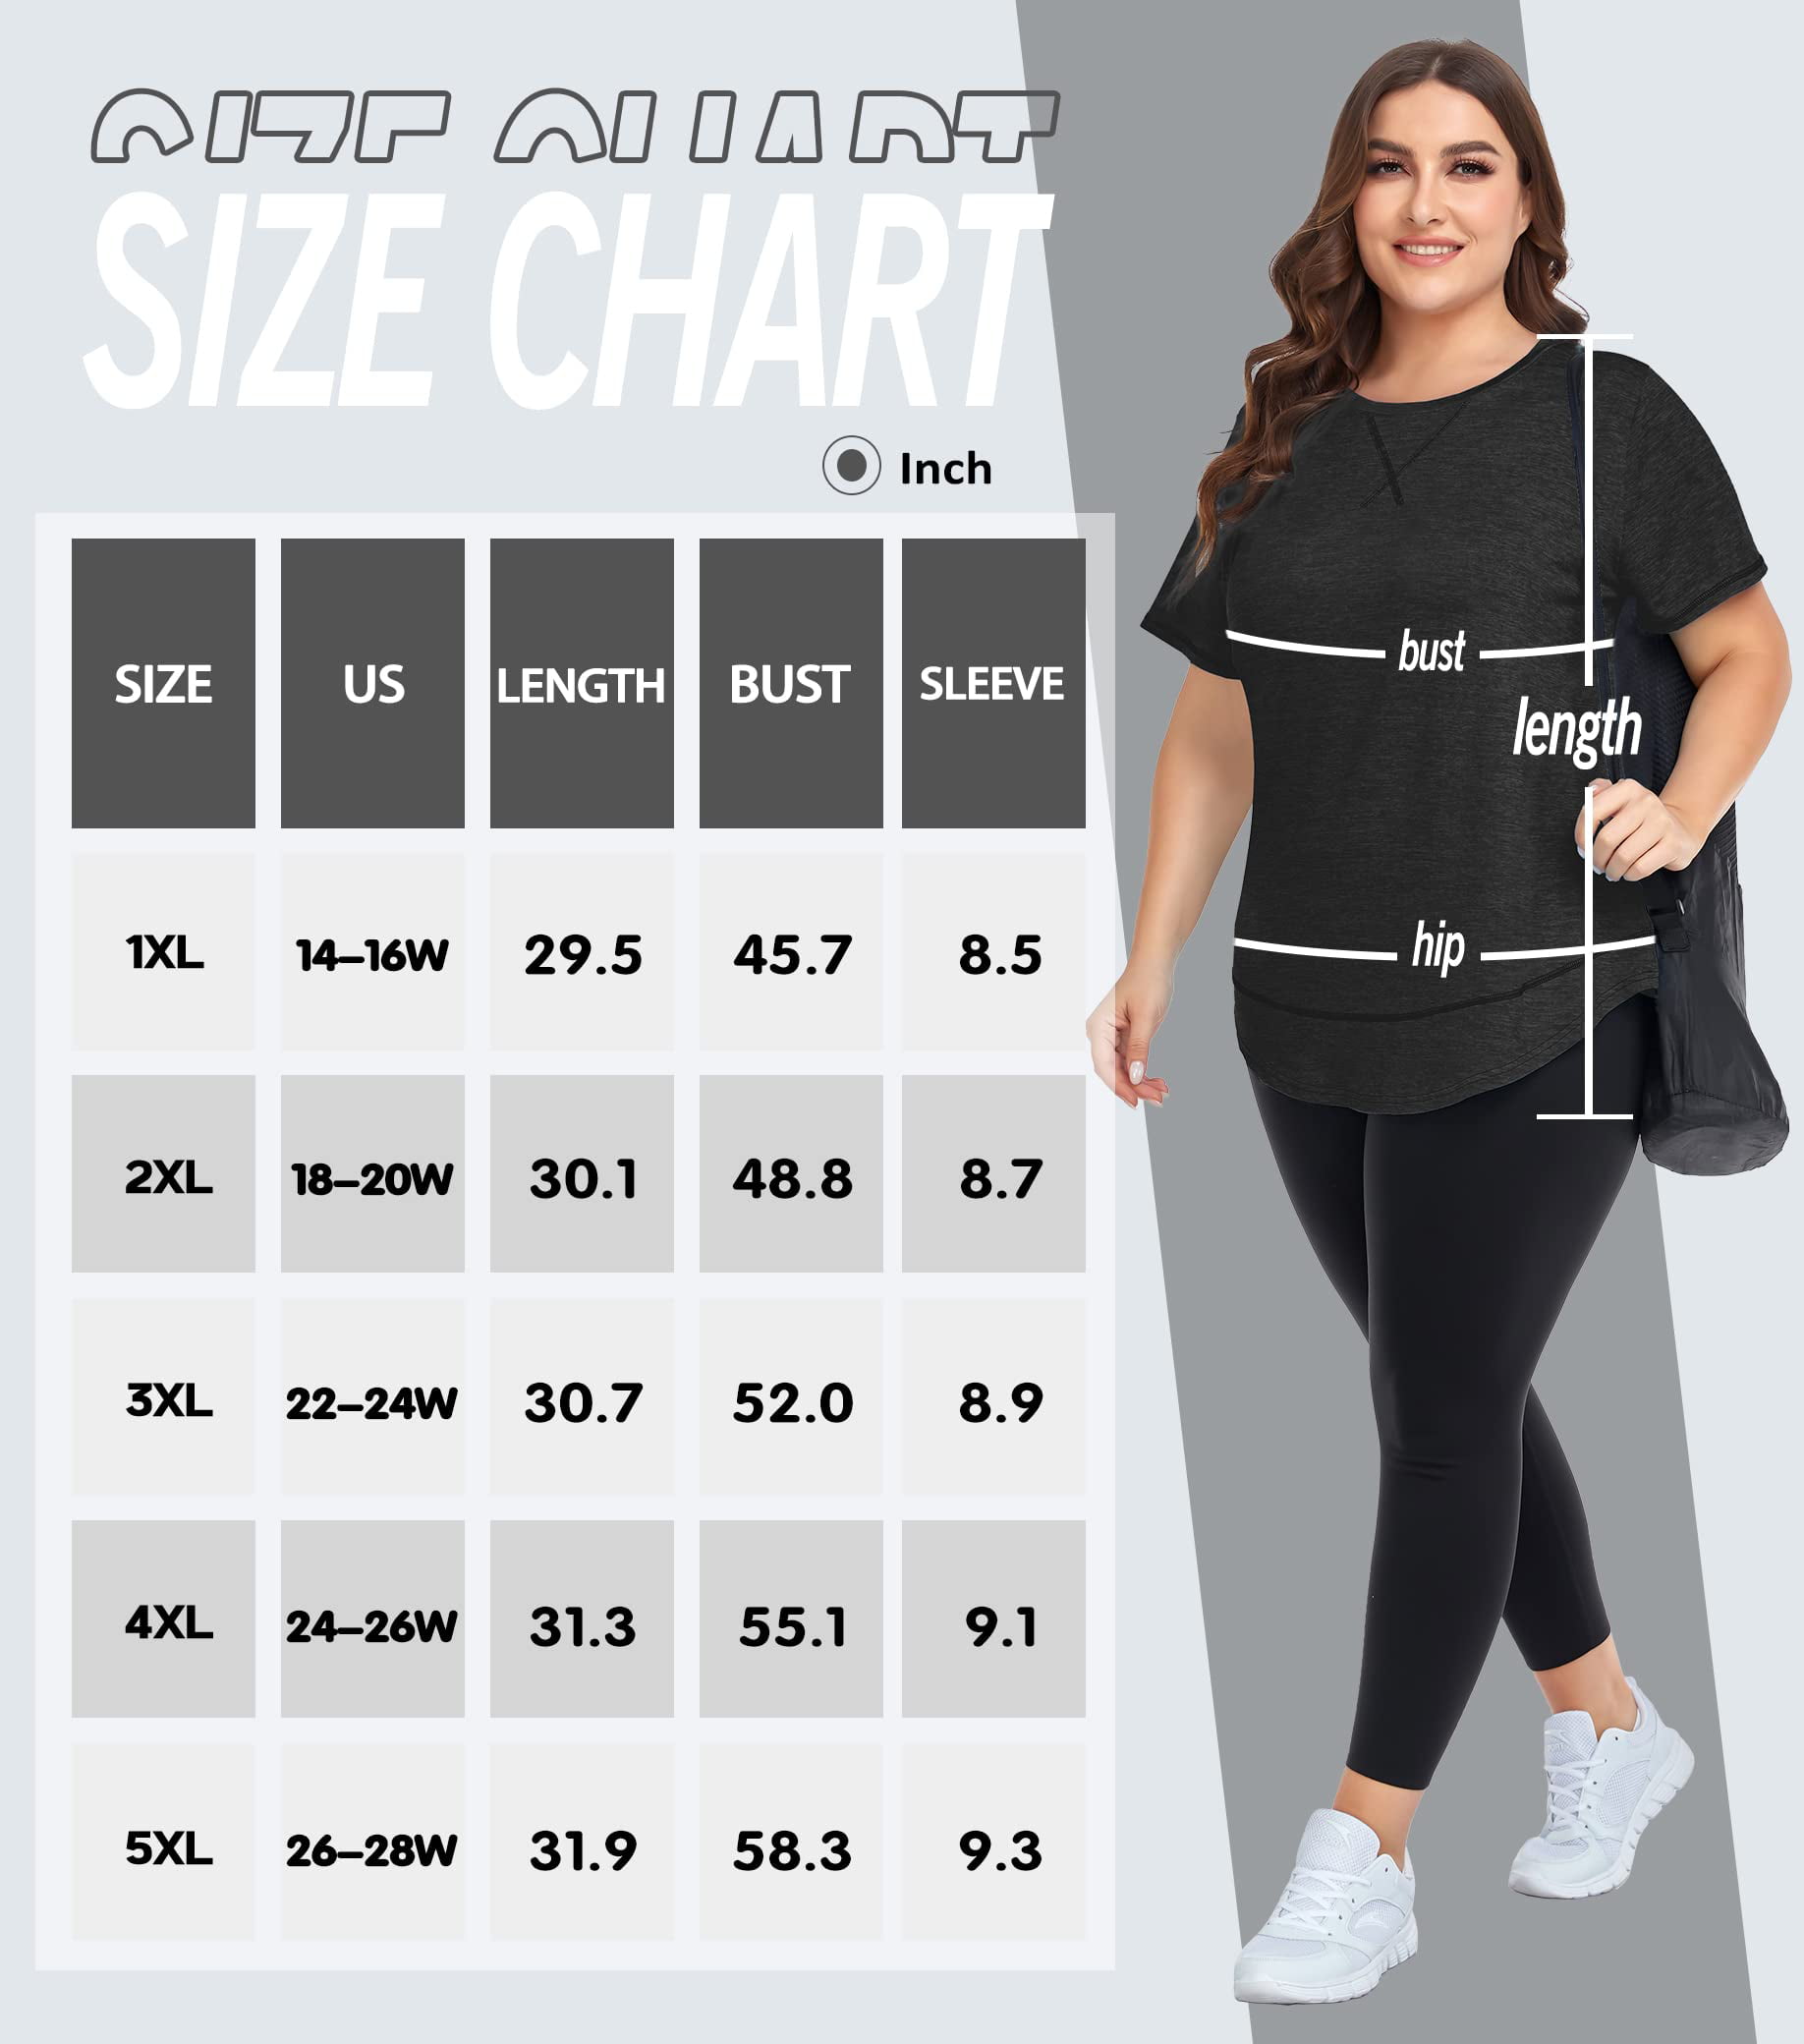 TIYOMI Plus Size Zip Tank Tops for Women Summer Black Camisoles V Neck  Camisole XL 14W 16W at  Women's Clothing store